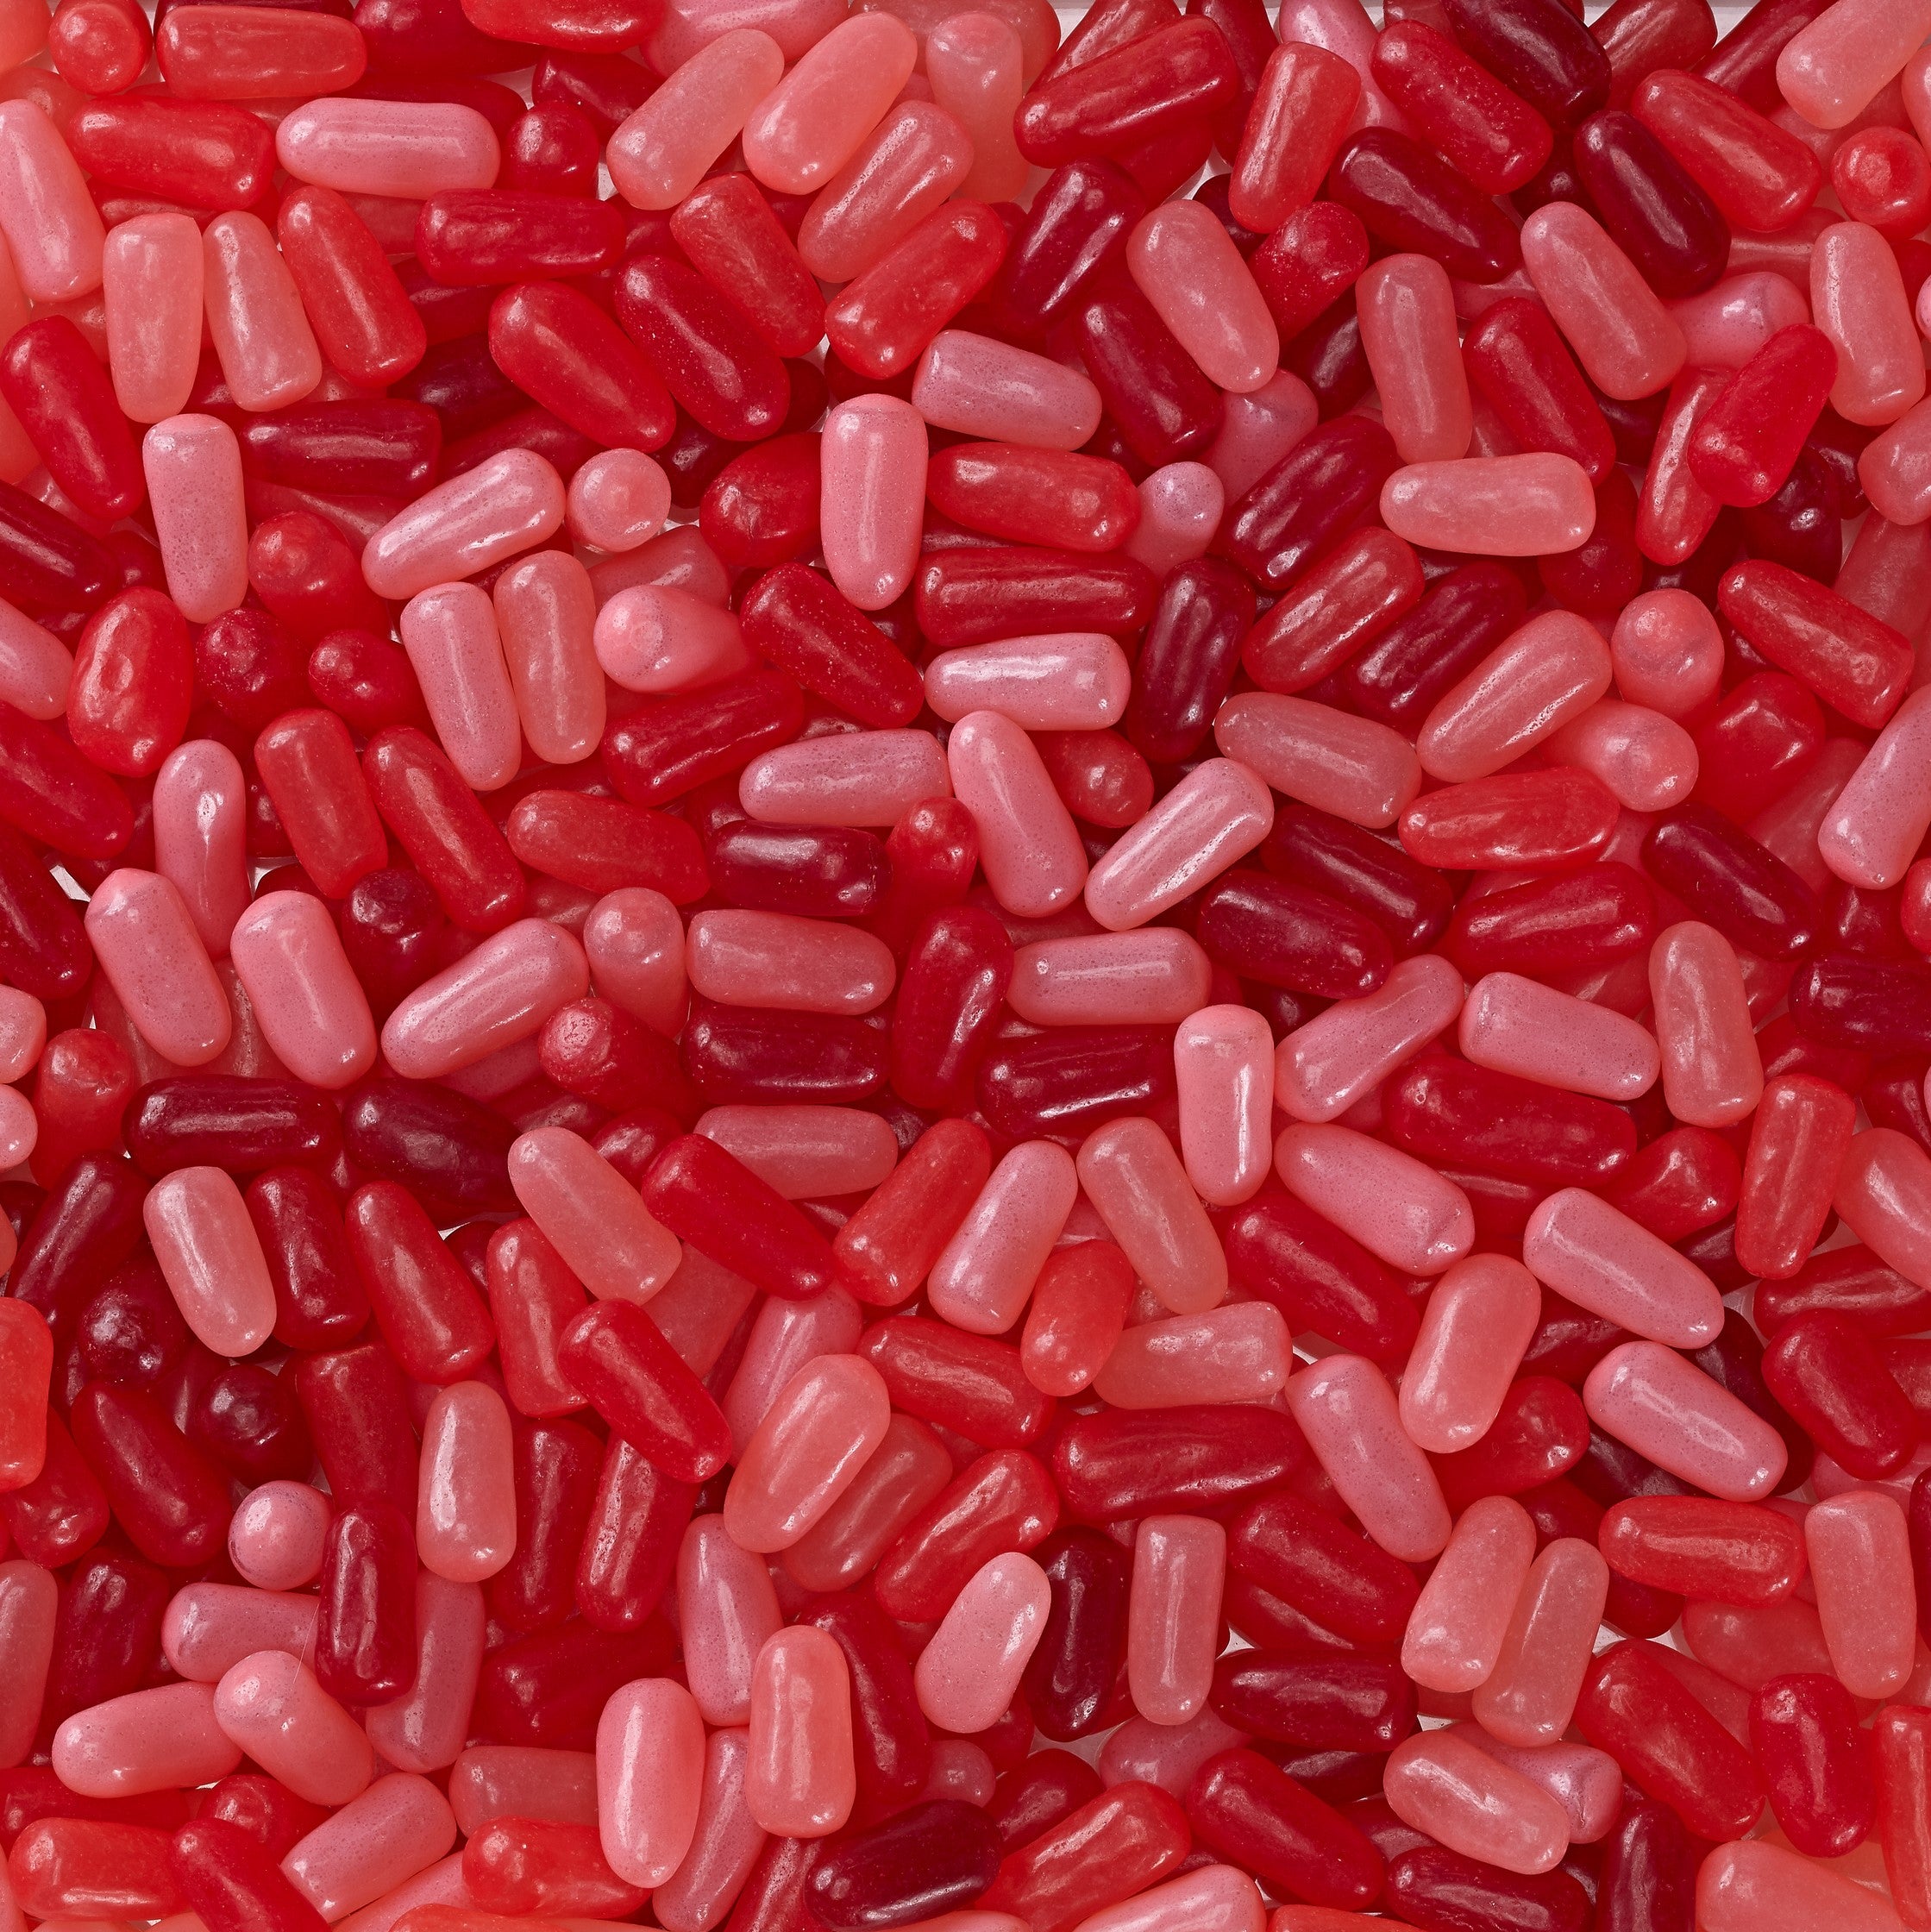 MIKE AND IKE RED RAGEOUS